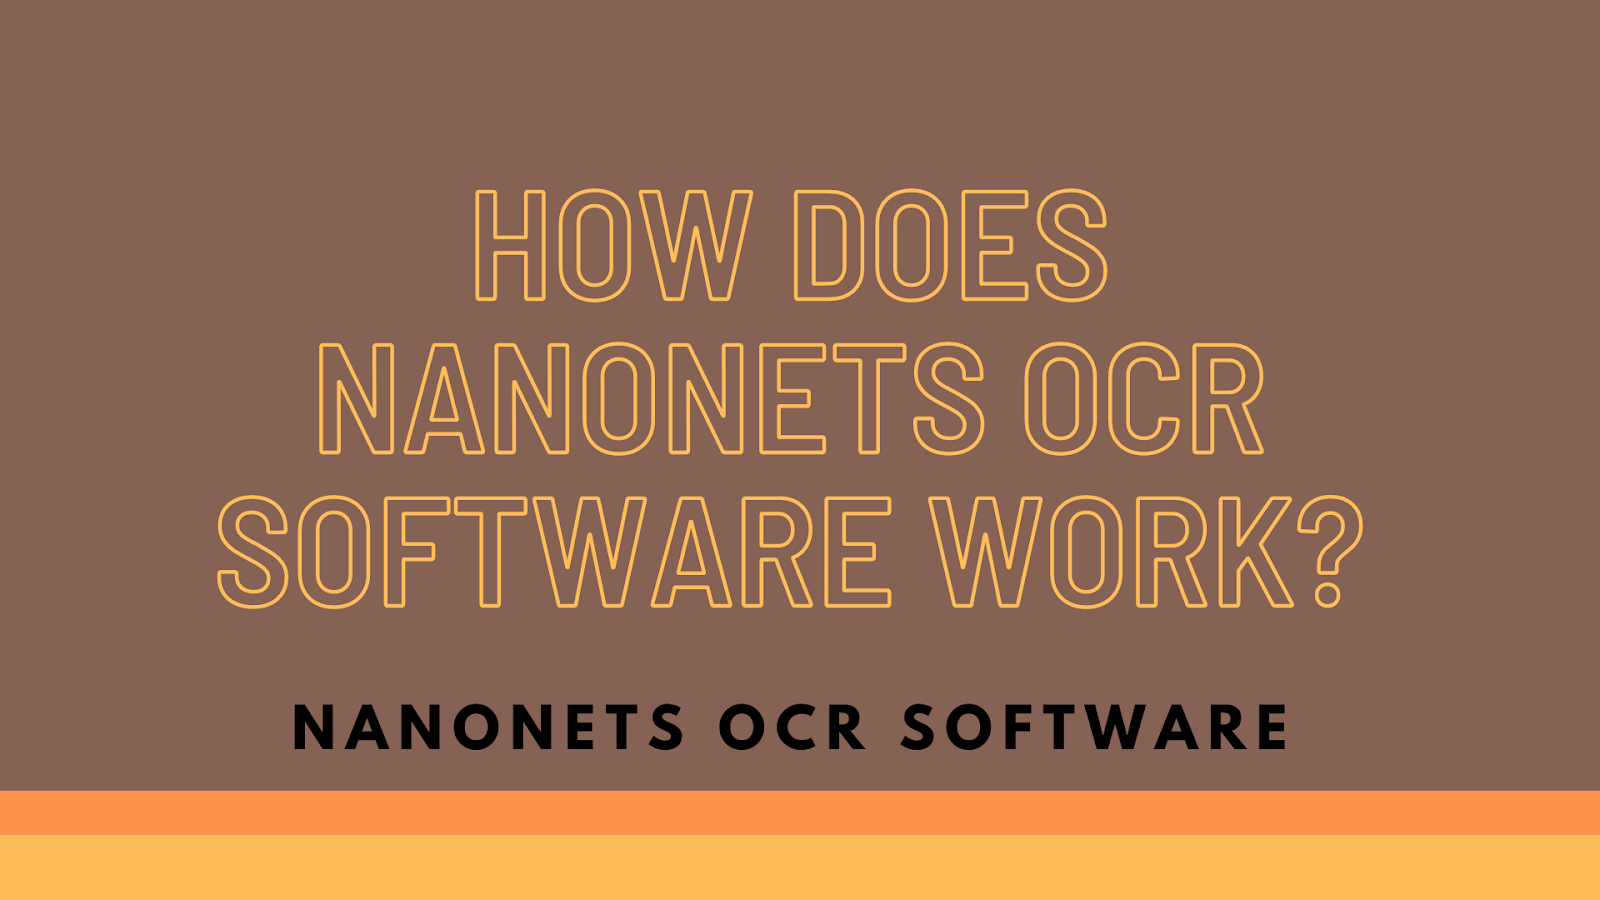 How Does Nanonets OCR Software Work?